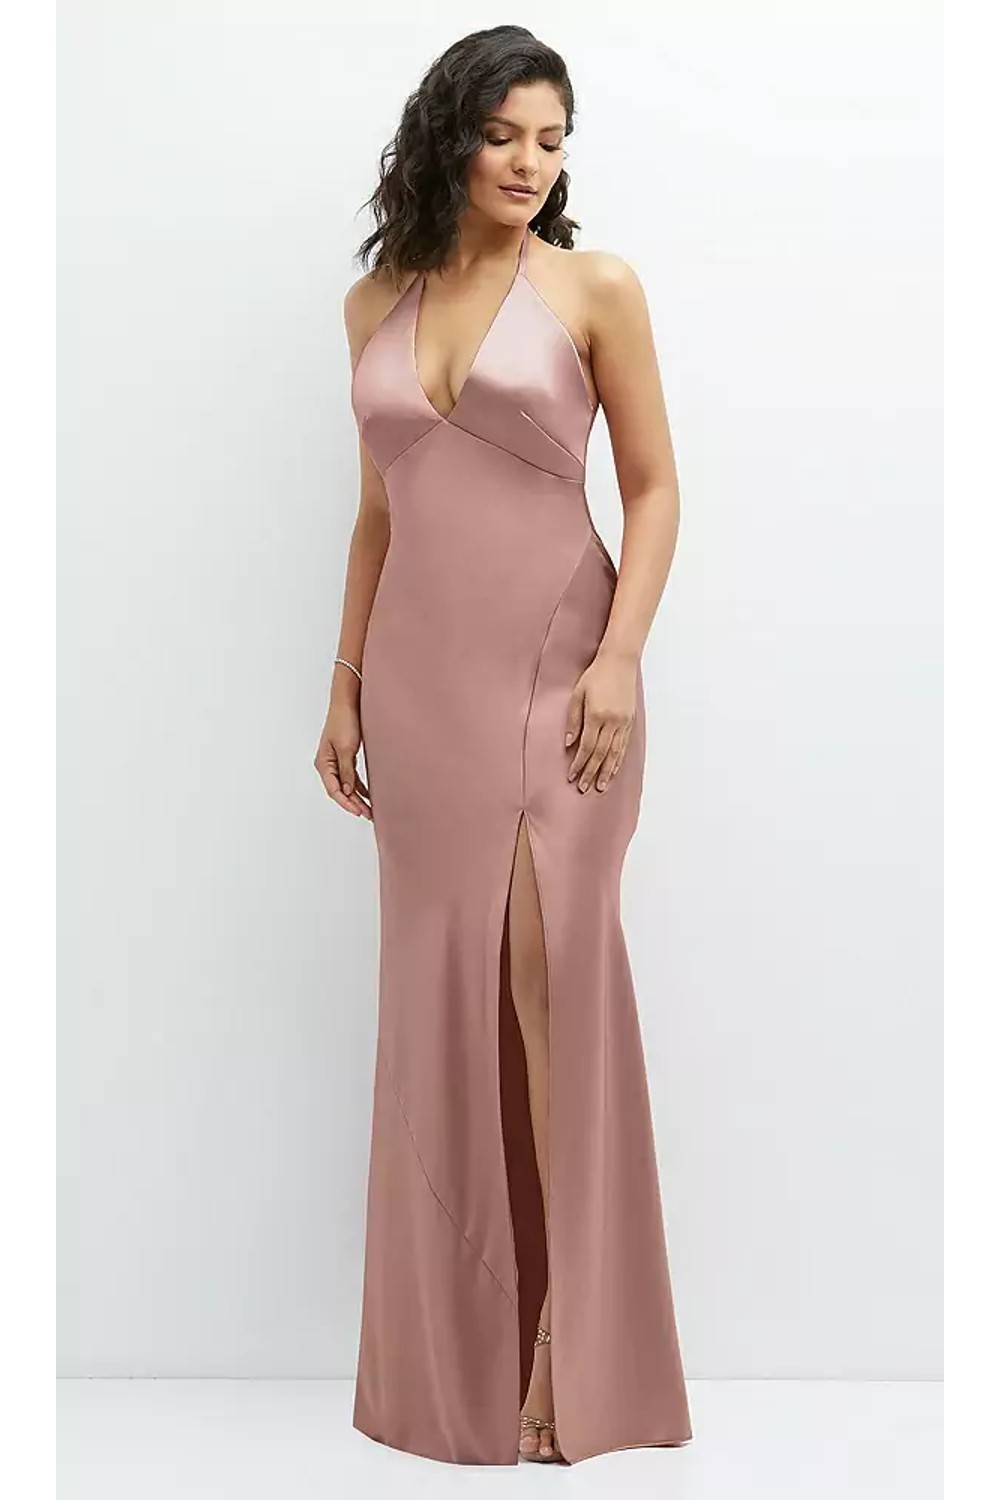 Try Before You Buy Astrid Bridesmaid Dress by Dessy